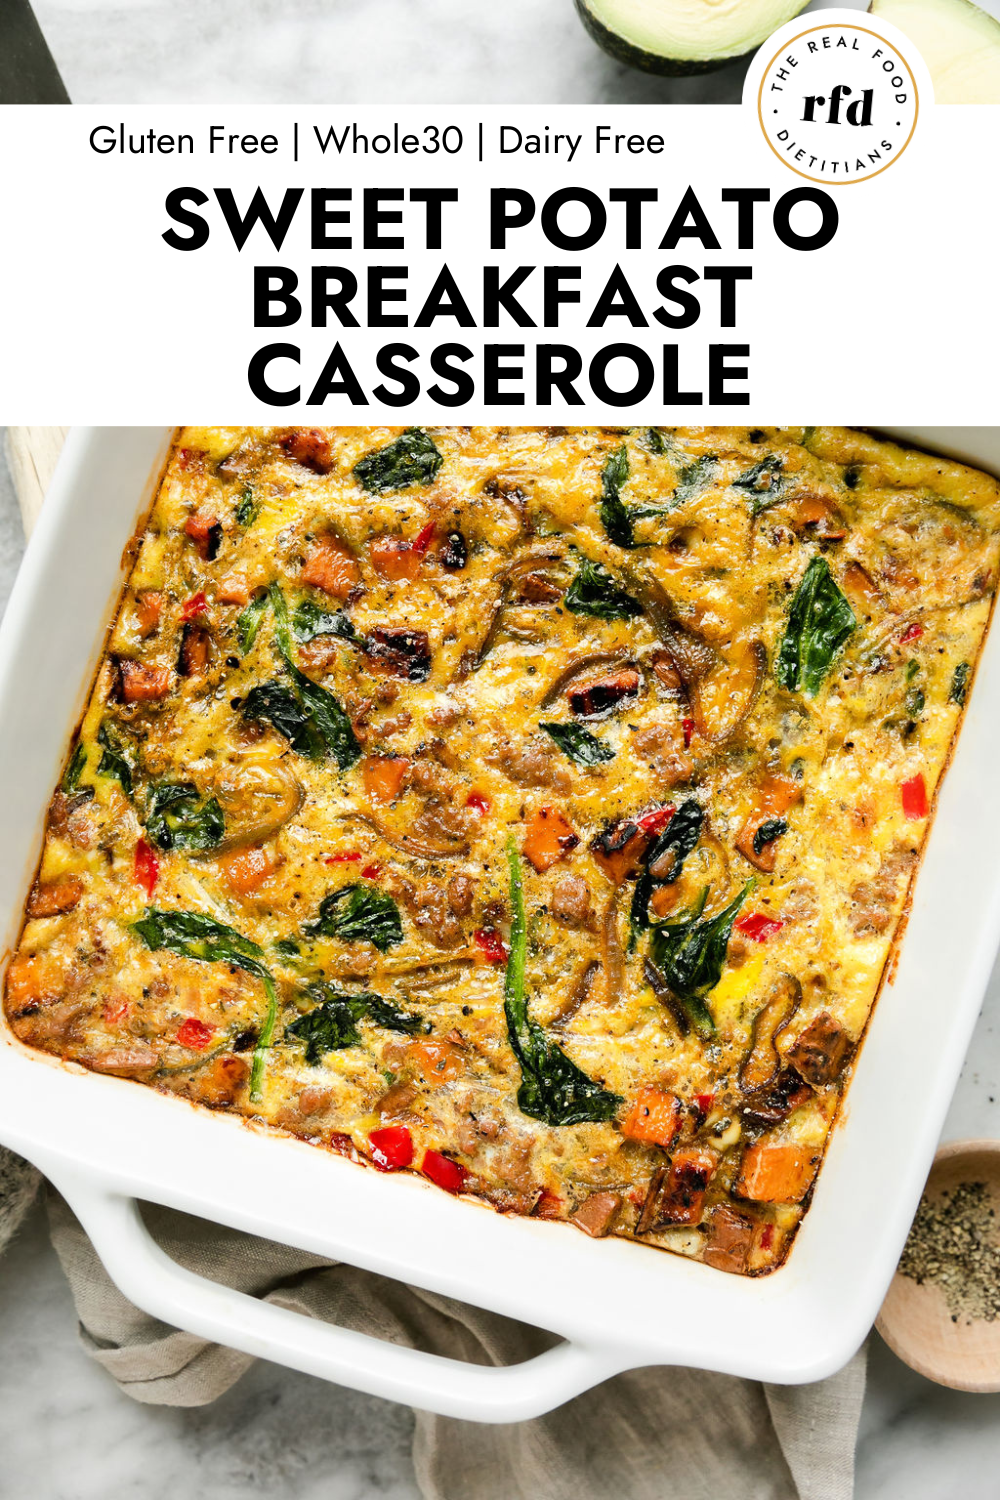 Crockpot Egg Casserole for Clean Eating on a Budget!